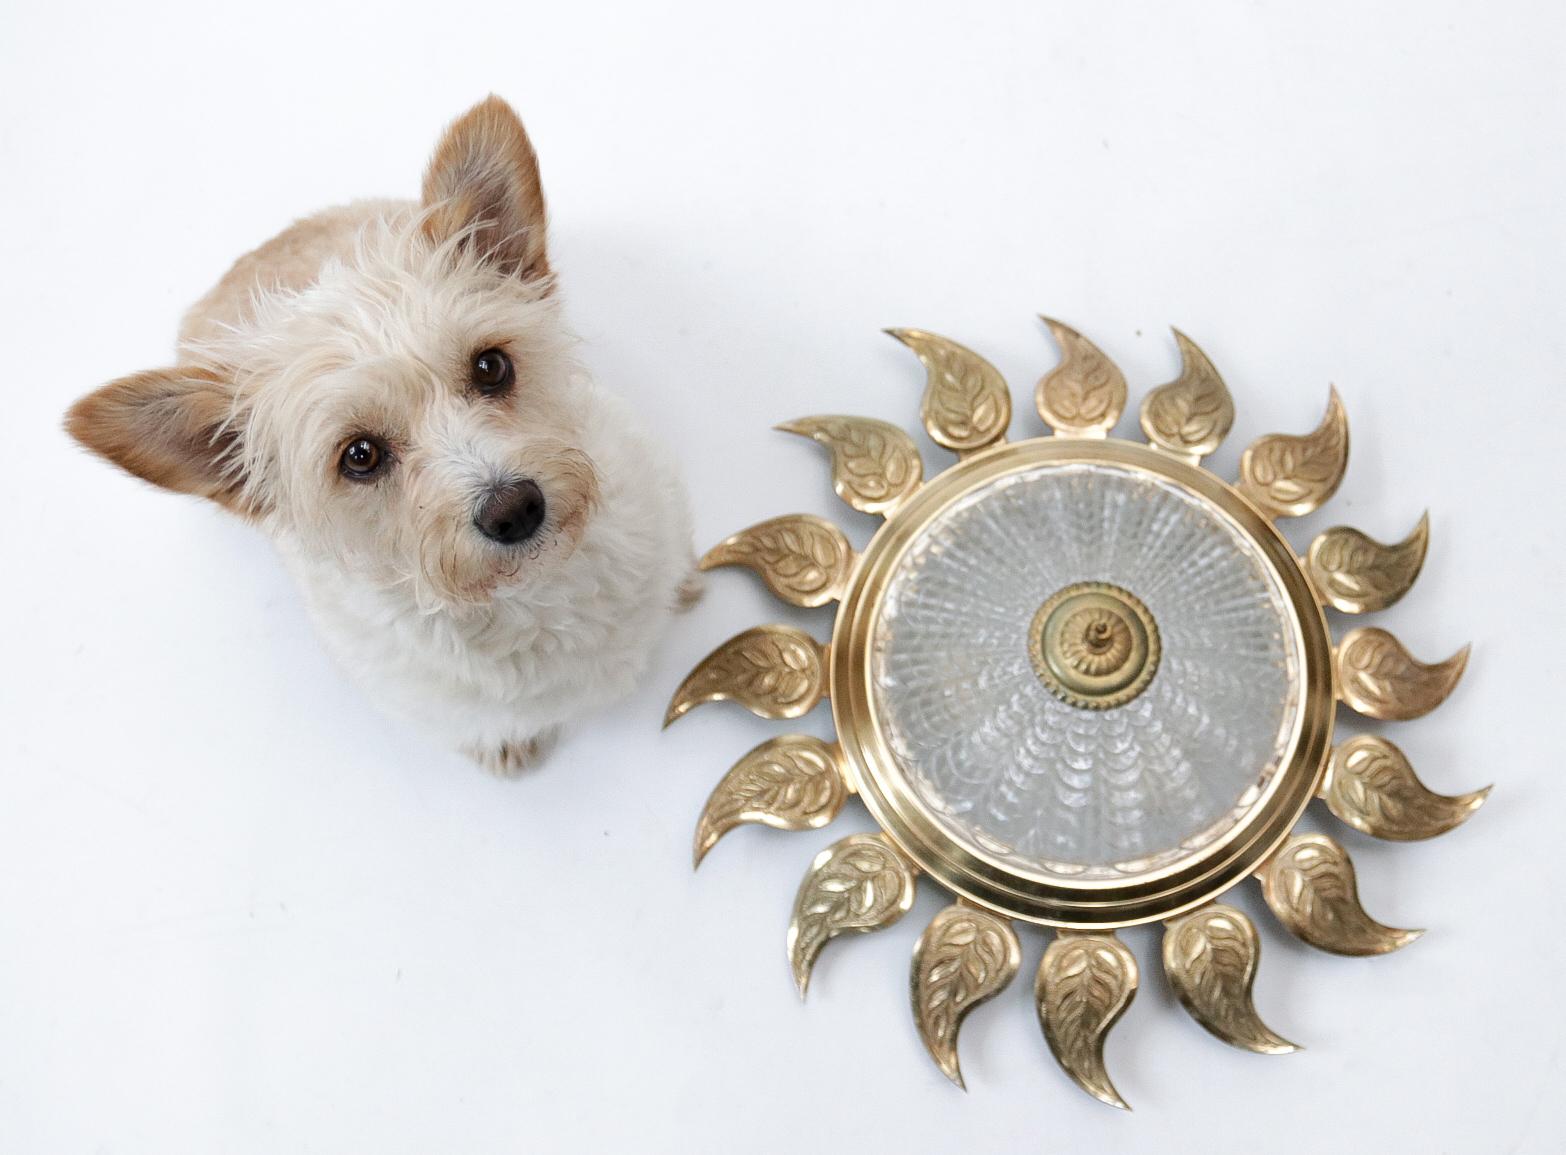 Eye-catching Mid-Century Modern sunburst flush mount ceiling or wall light made in Spain in the 1950s.
Sunburst shaped structure with gilt iron leaves. 
A patterned pressed glass shade with a gilt iron finial at the central part.
The back plate